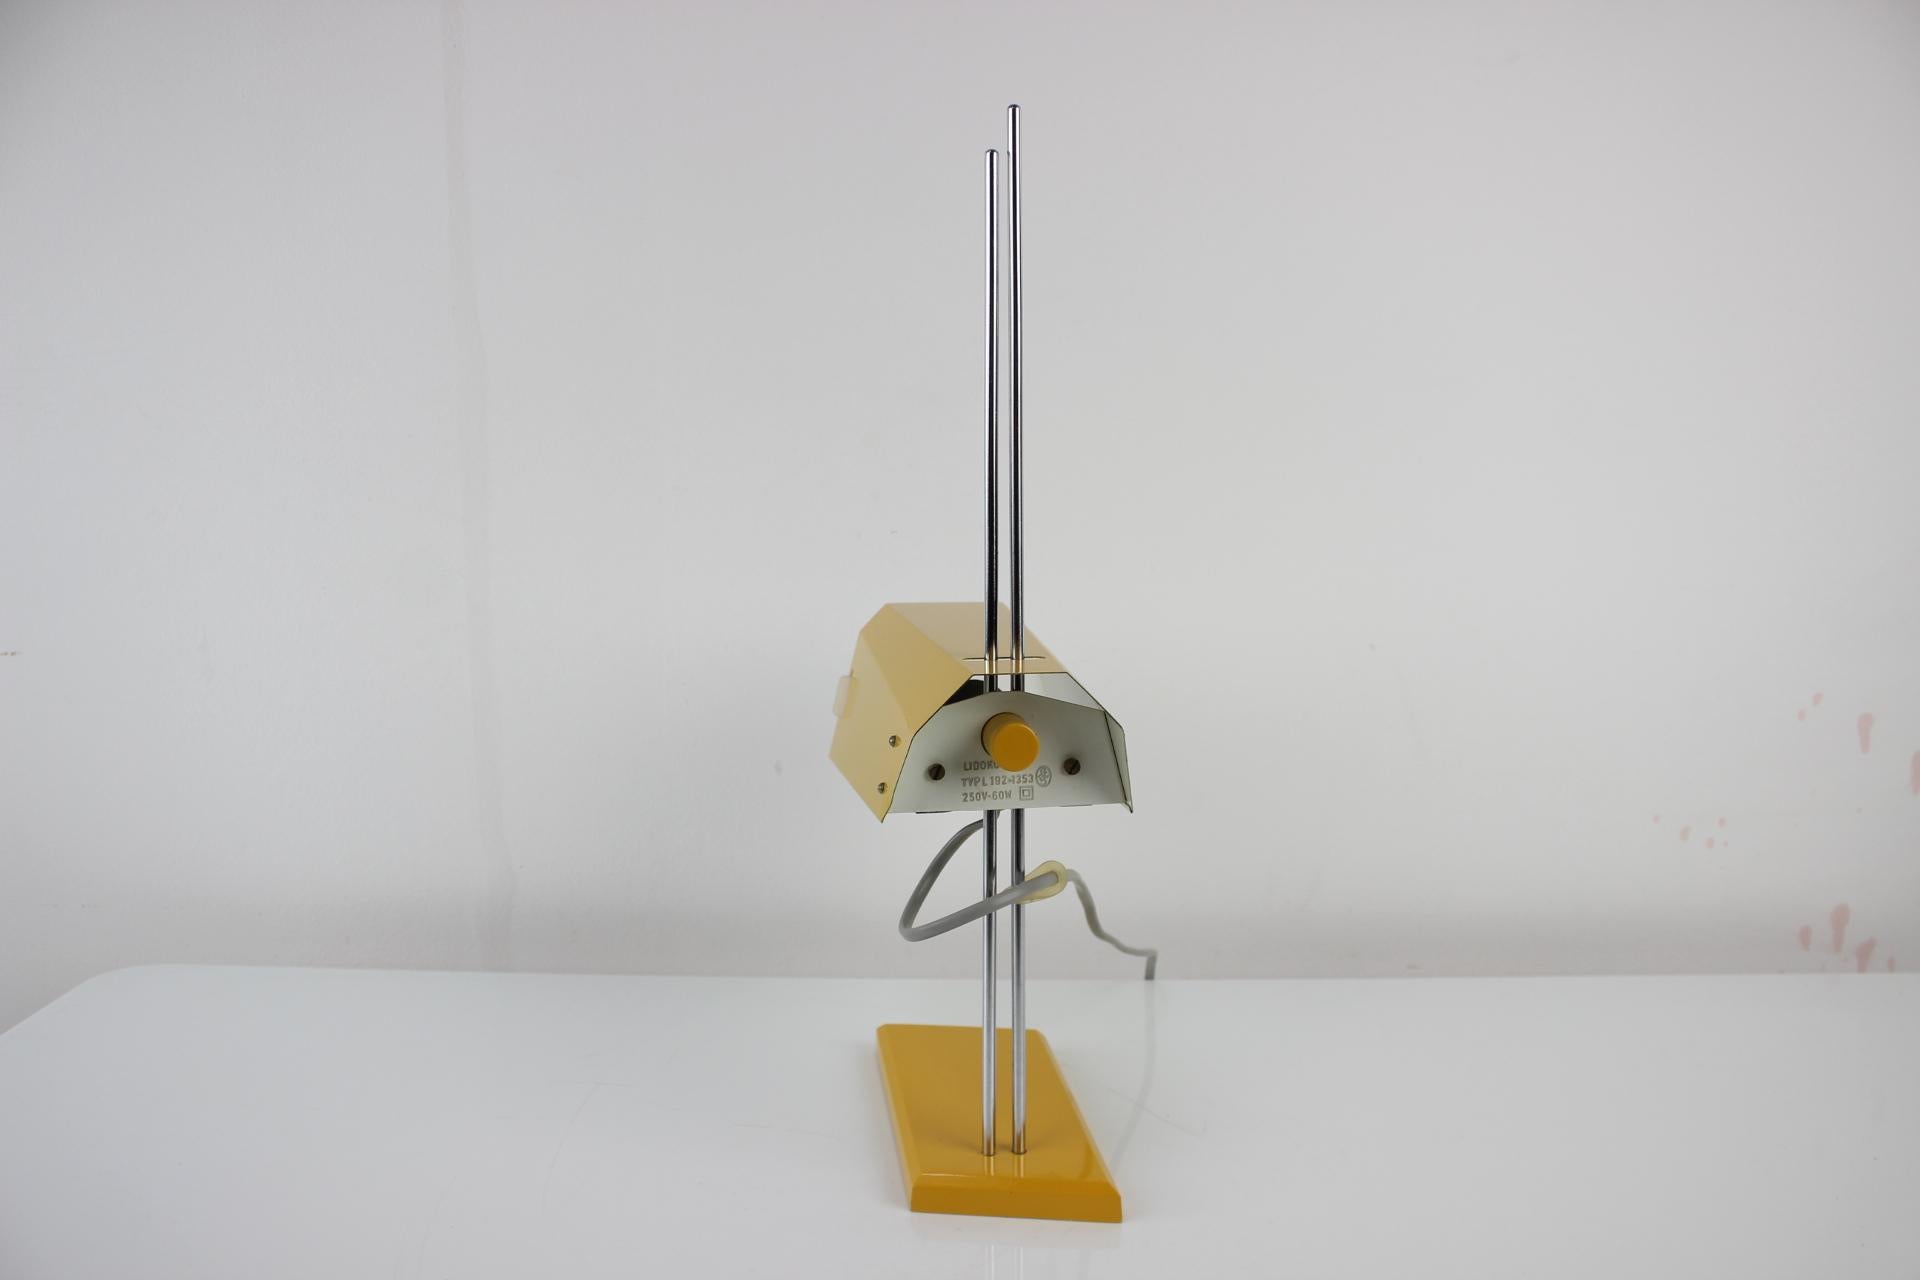 Czech Midcentury Adjustable Table Lamp by Lidokov, 1970s For Sale